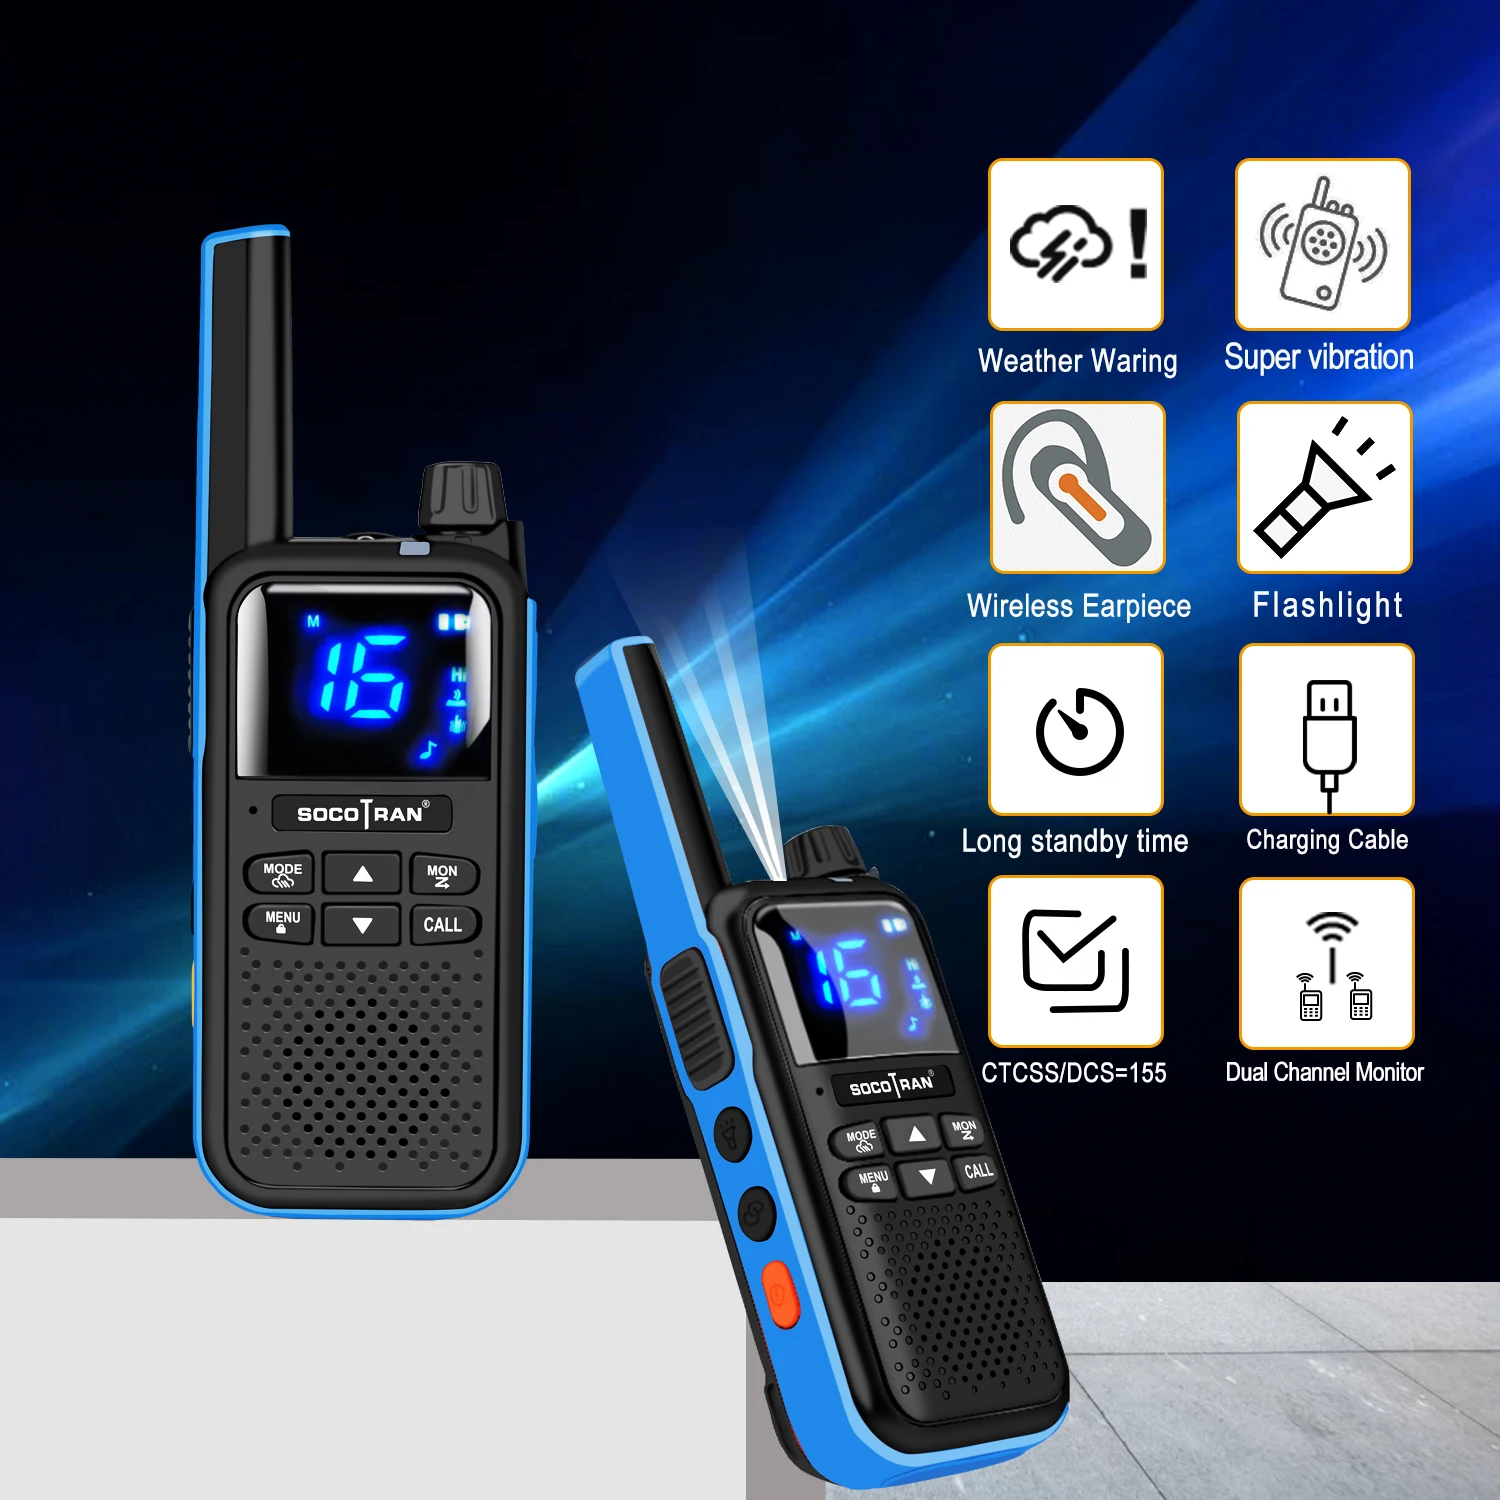 Socotran T82 2pc Walkie Talkie Wireless headset Bluetooth-compatible PMR/FRS 16/22CH Walky Talky Portable two way radio